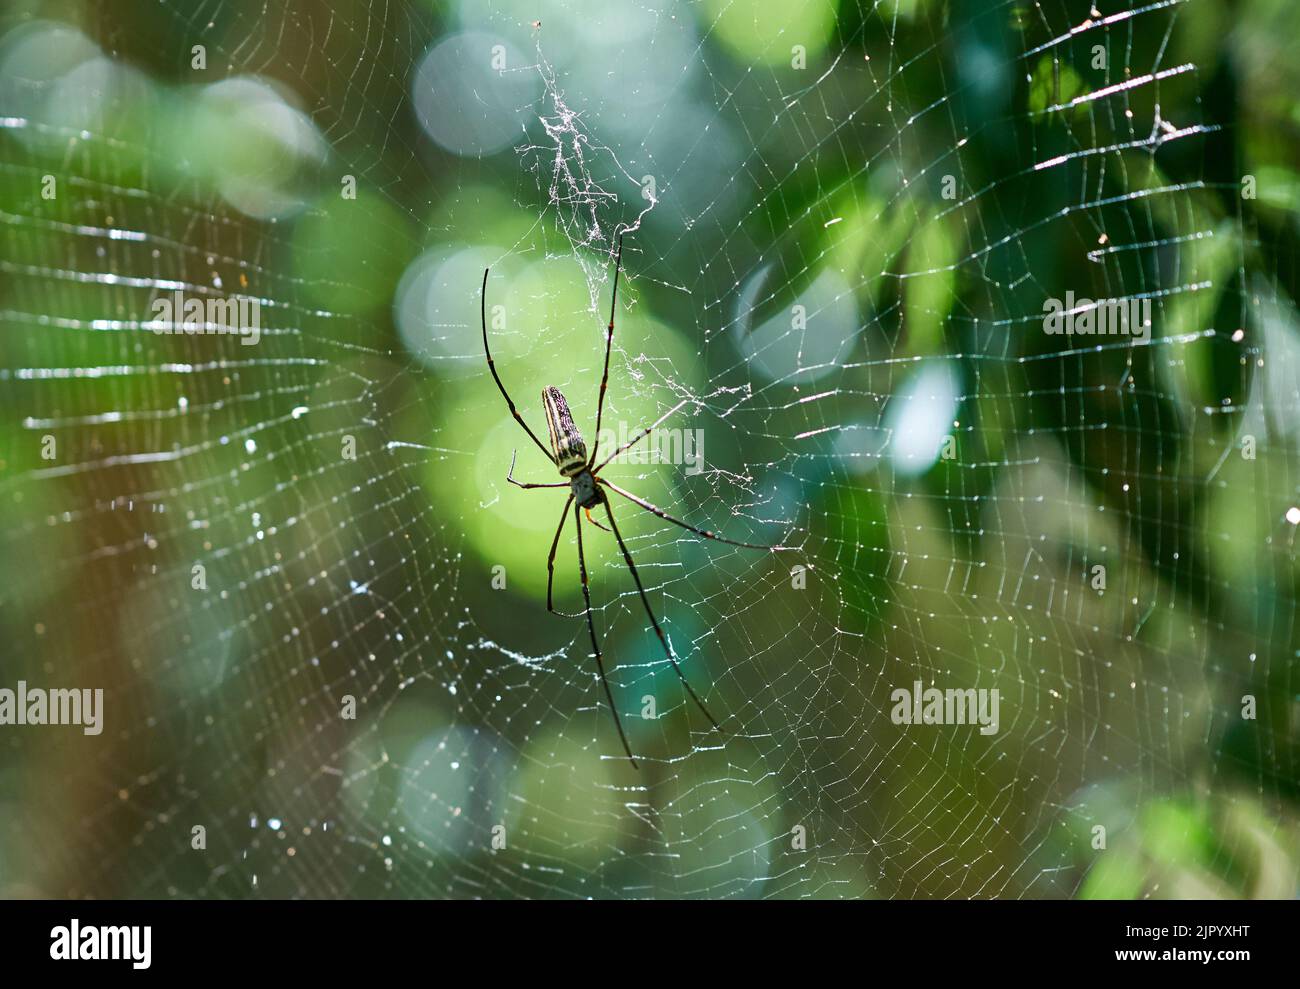 A large spider in a web in a green forest. Stock Photo